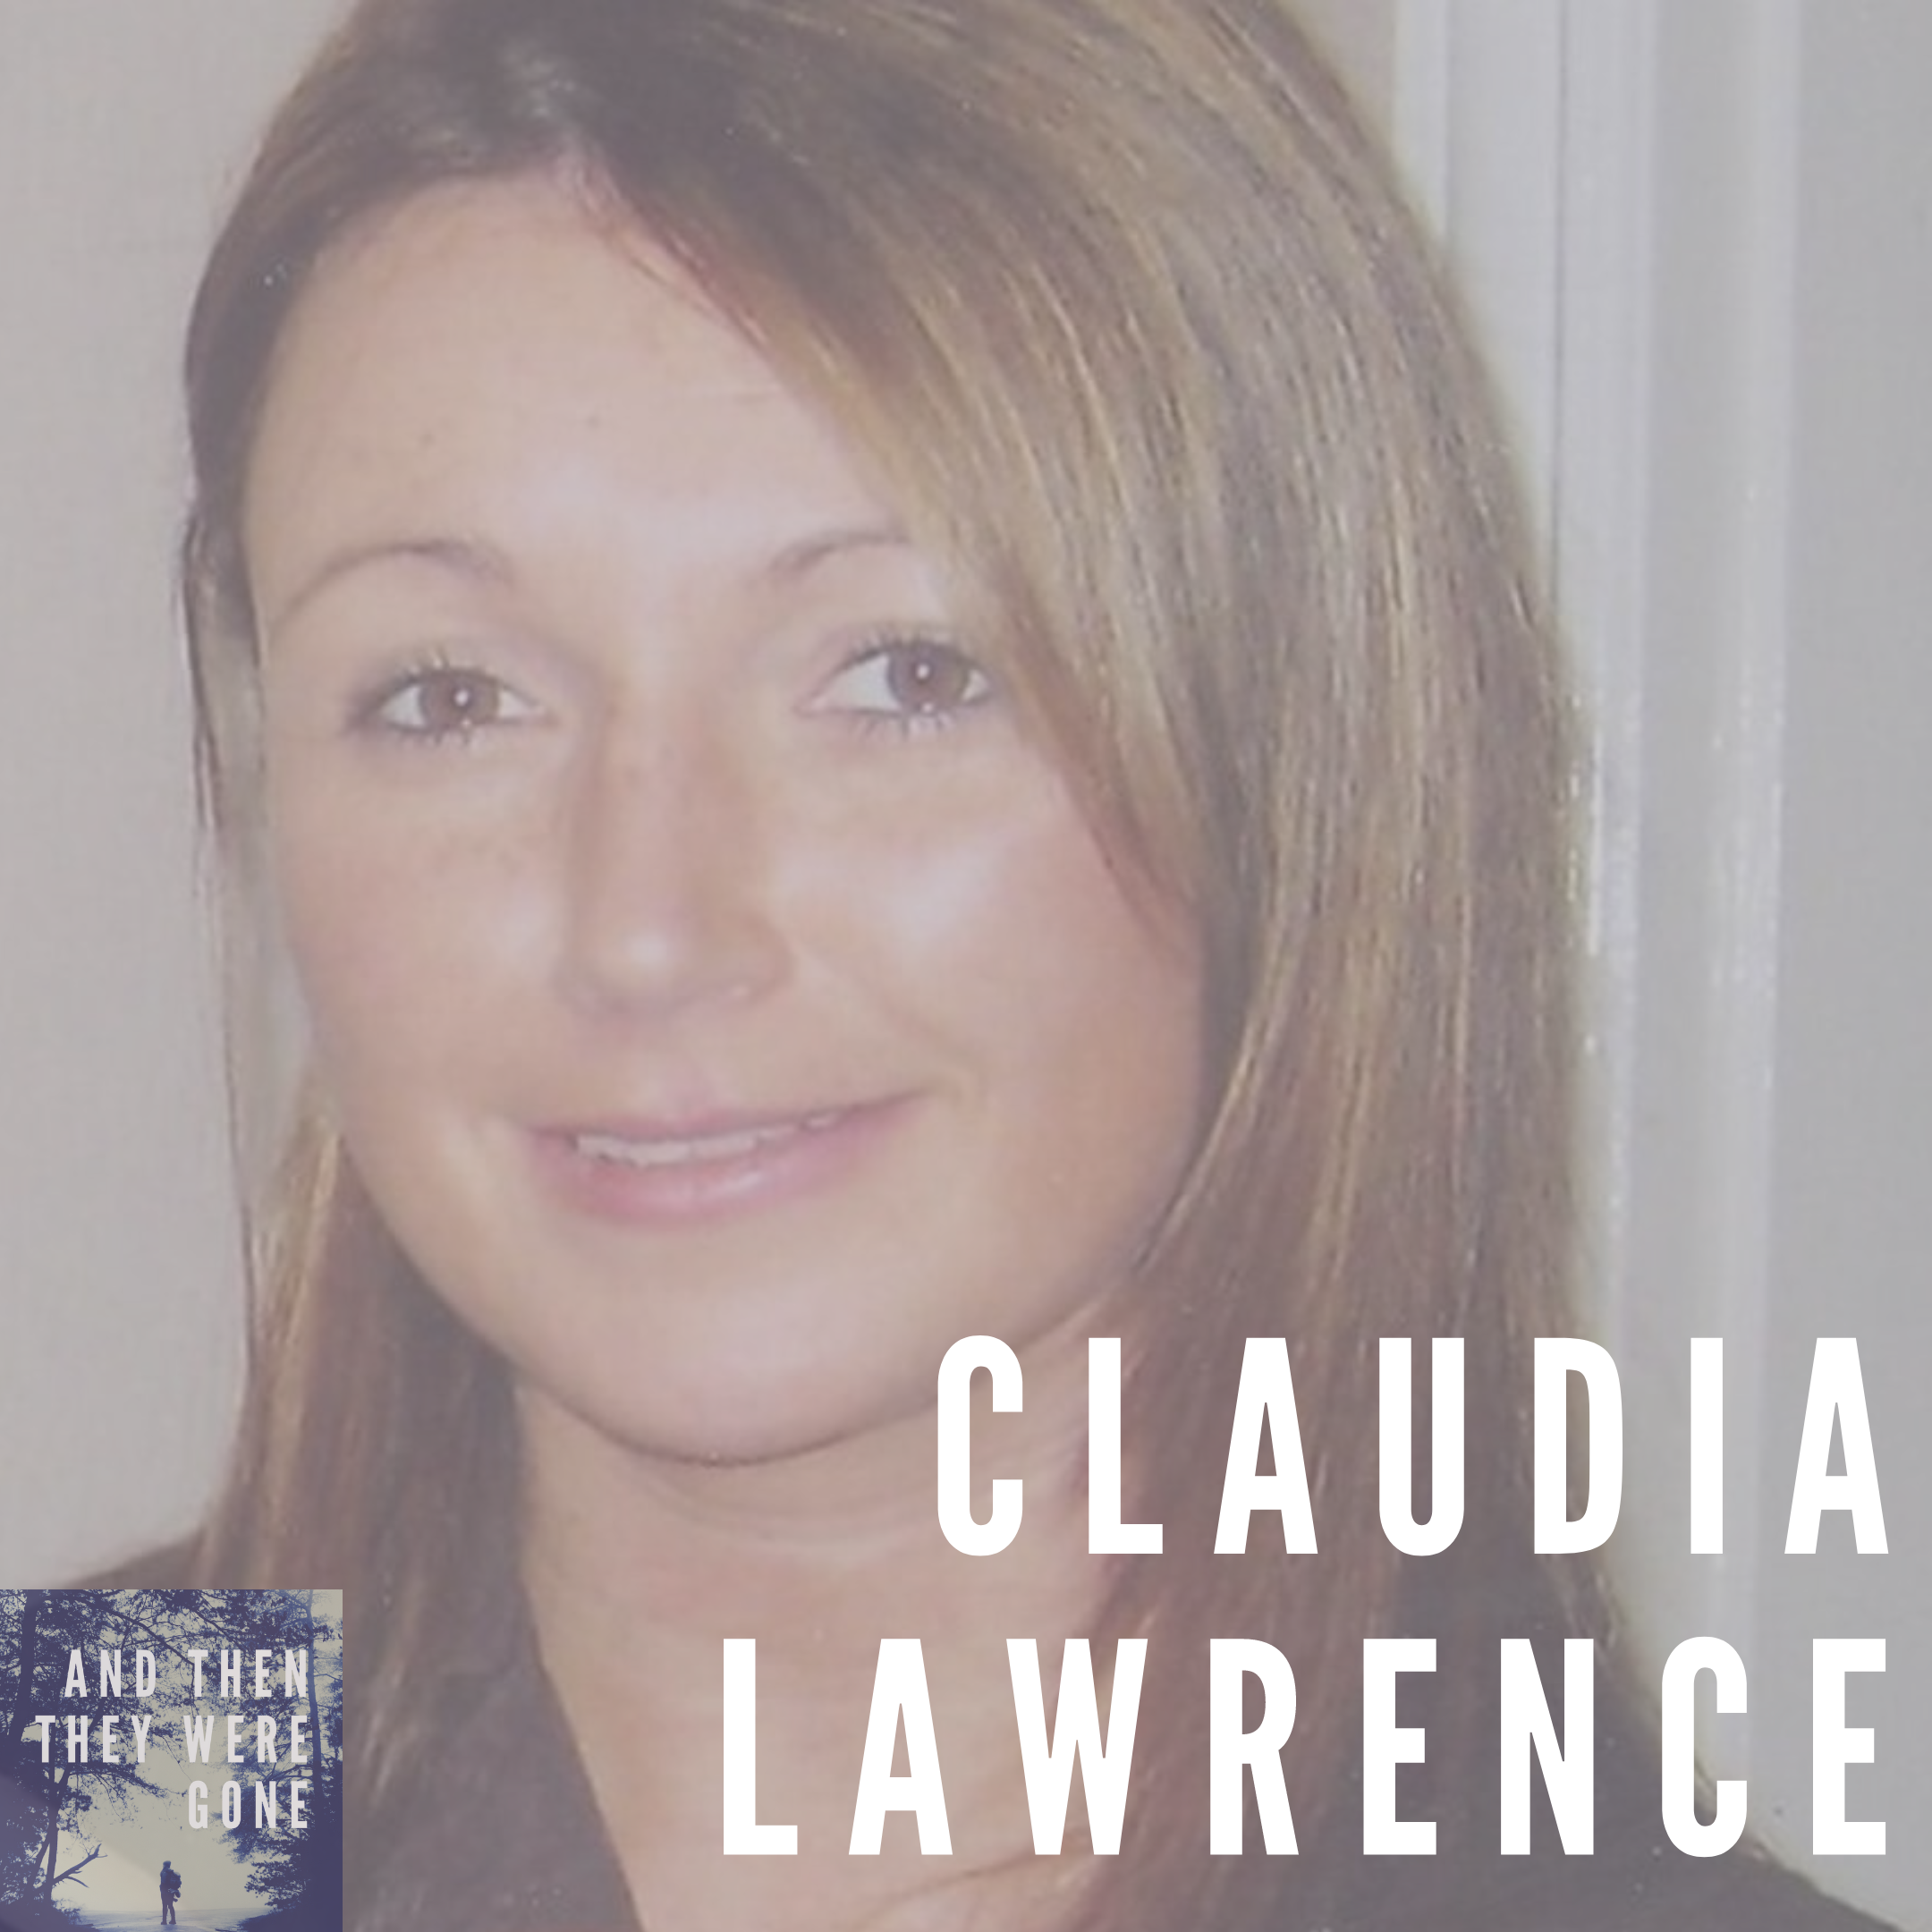 Claudia Lawrence has been missing from York, England, since March 19, 2009